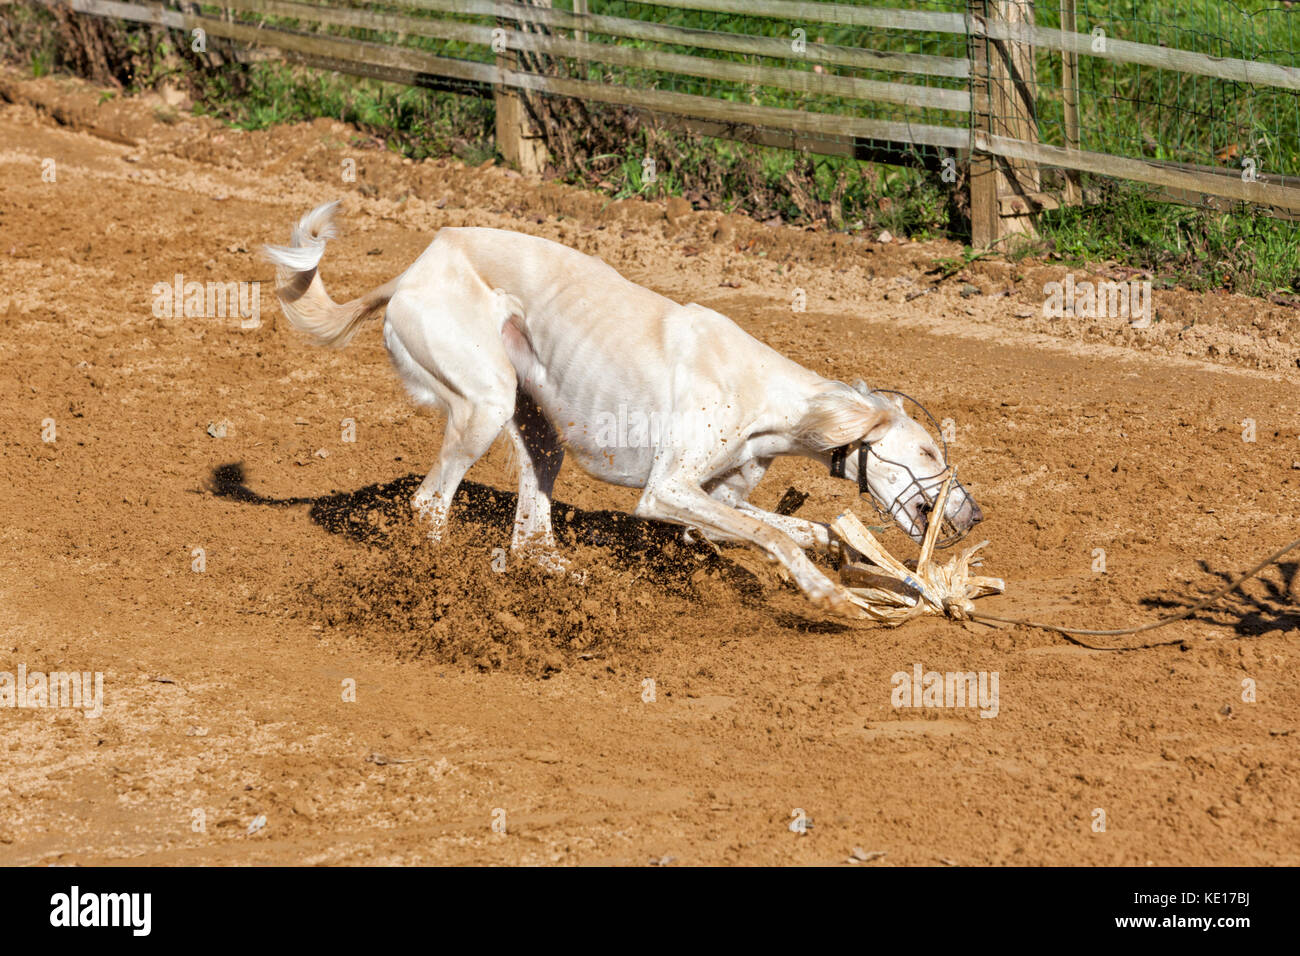 Saluki sighthound catching the bait at the finish of a race course Stock Photo